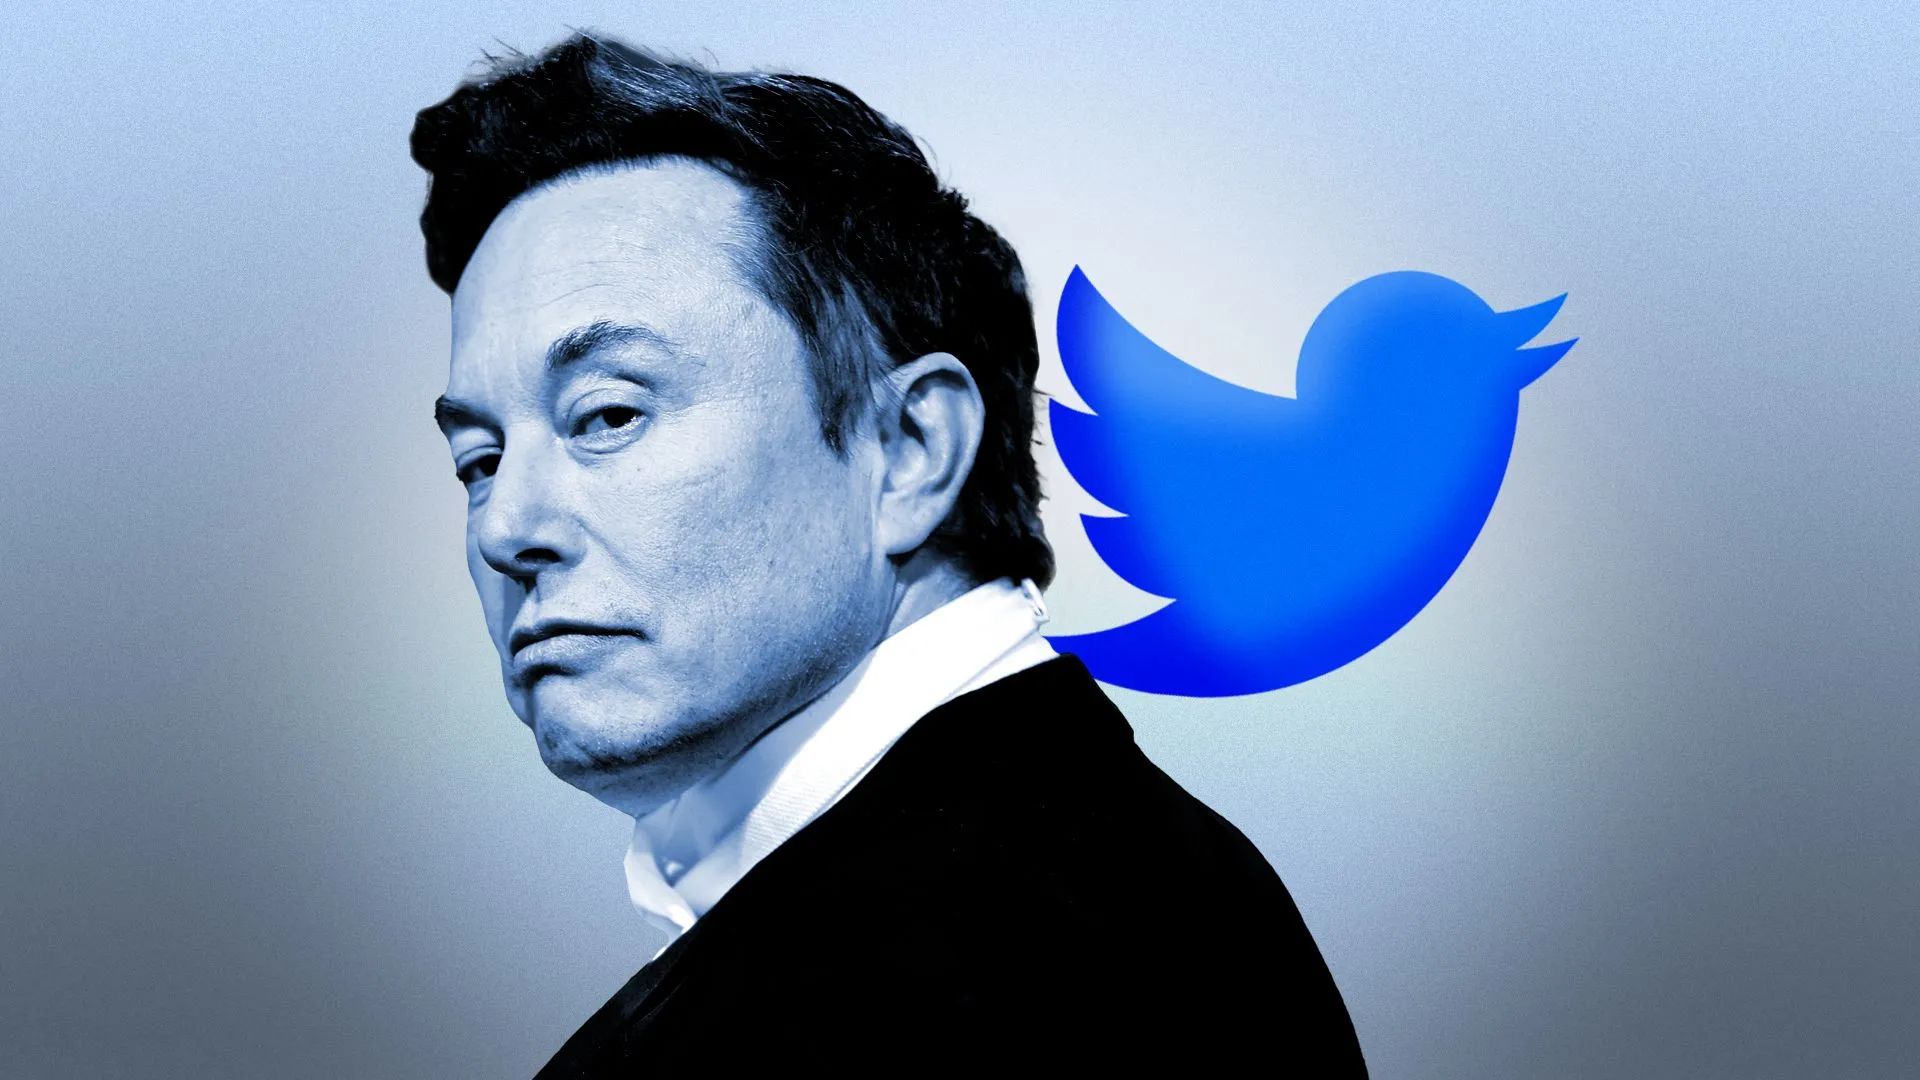 elon-musks-x-faces-global-outage-leaving-users-unable-to-view-tweets